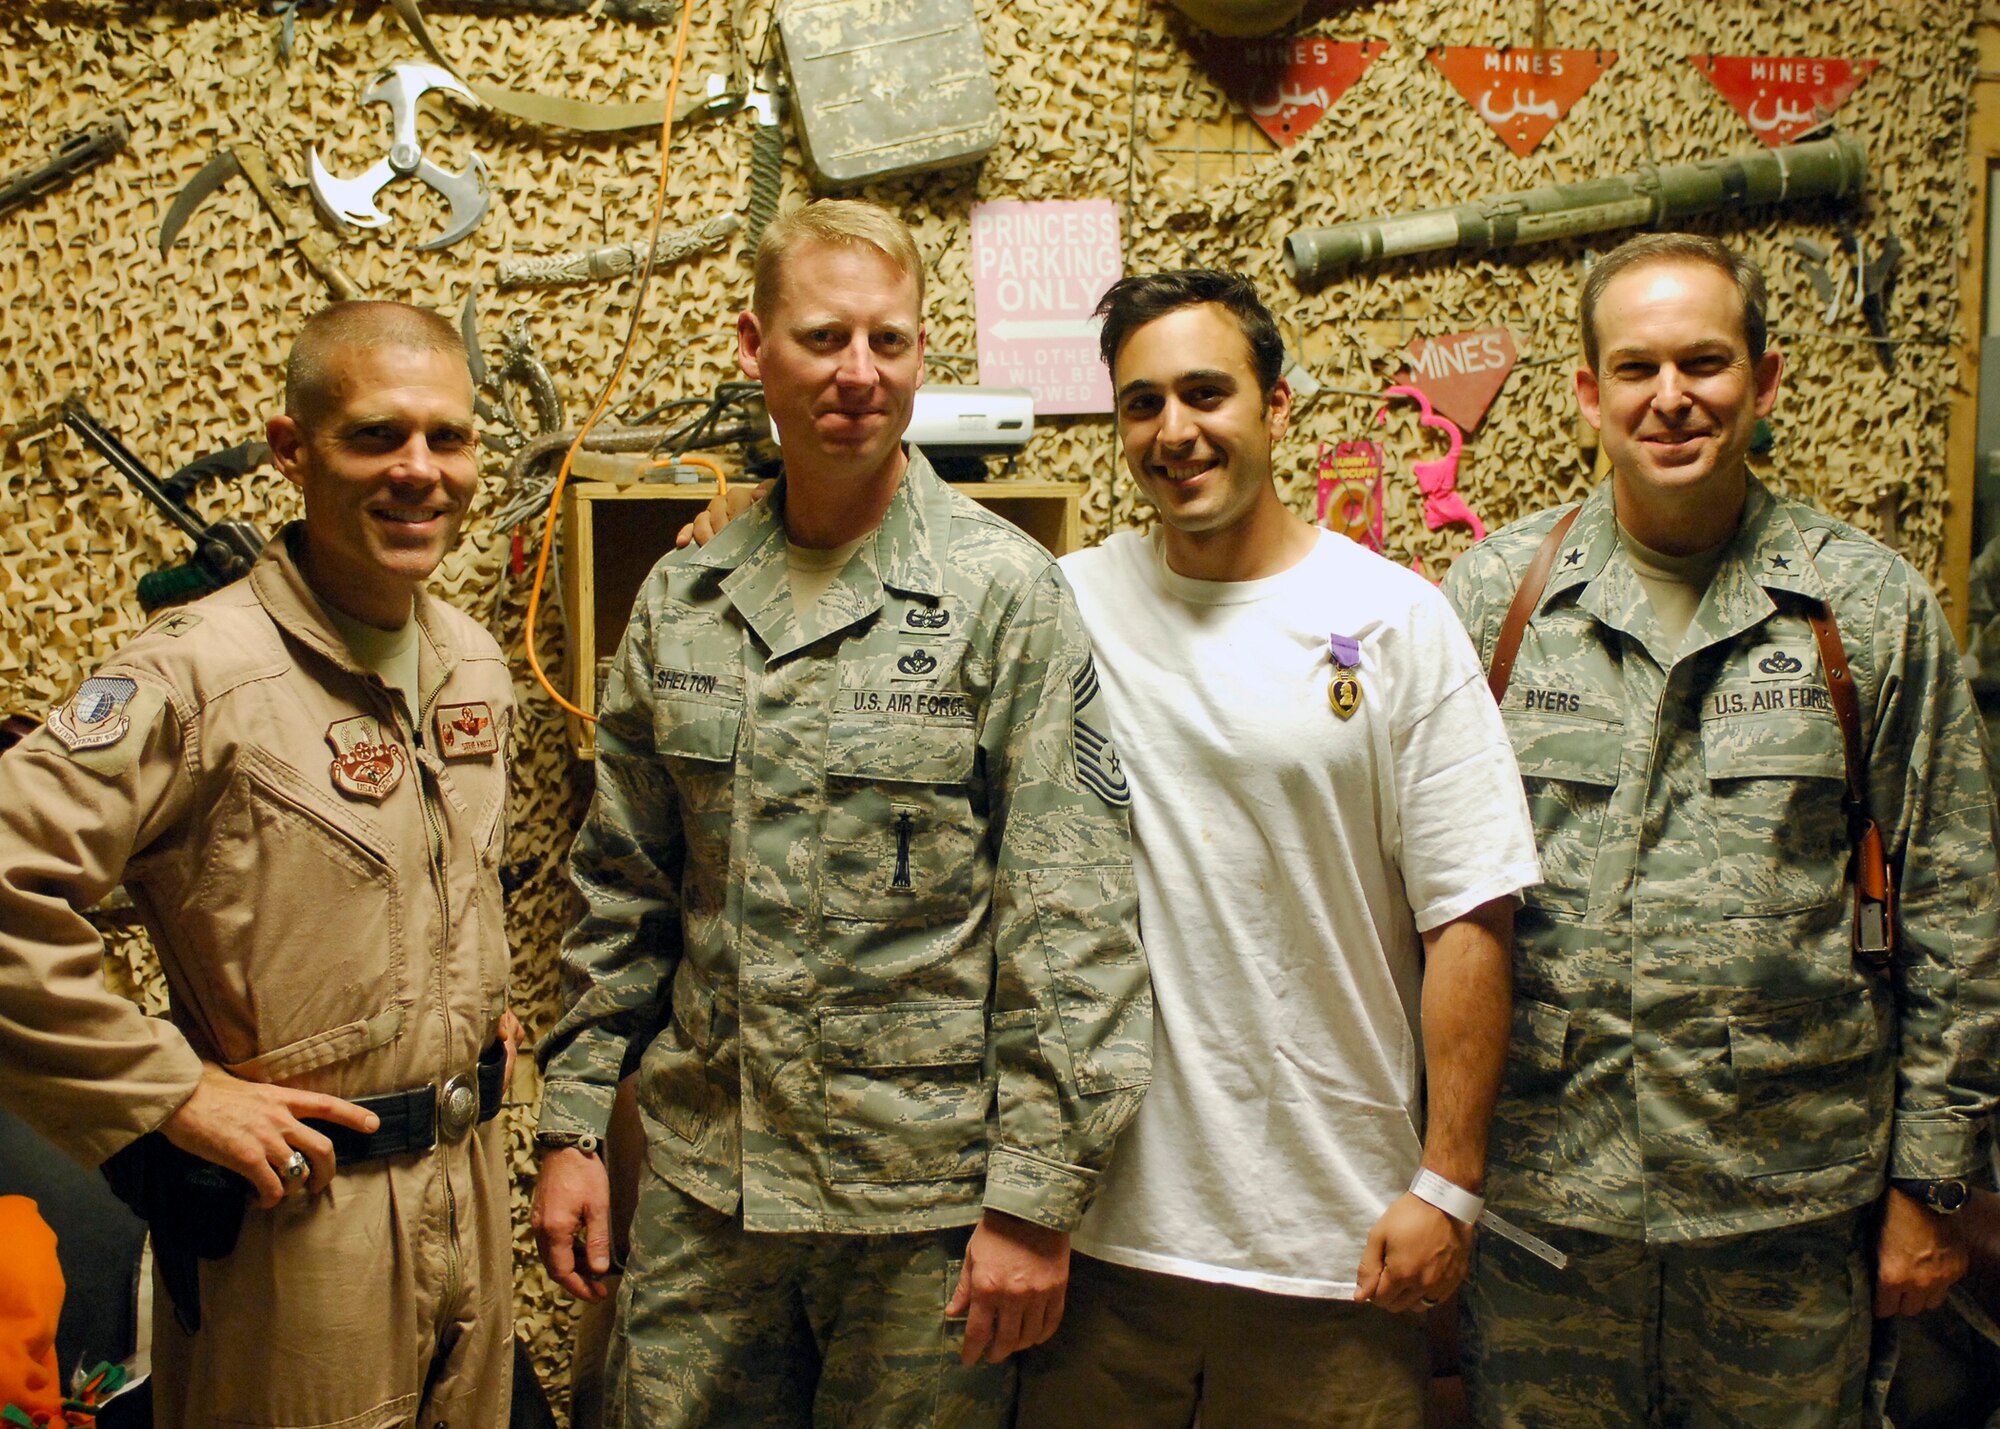 Tech. Sgt. Richard Gibbons (center right), 140th Civil Engineering Explosive Ordnance Disposal Flight, is awarded a Purple Heart medal Sept. 19, 2009, at Bagram Air Base, Afghanistan. His vehicle was hit by a rocket-propelled grenade while on a mounted patrol in Afghanistan earlier in the week. (Courtesy photo)